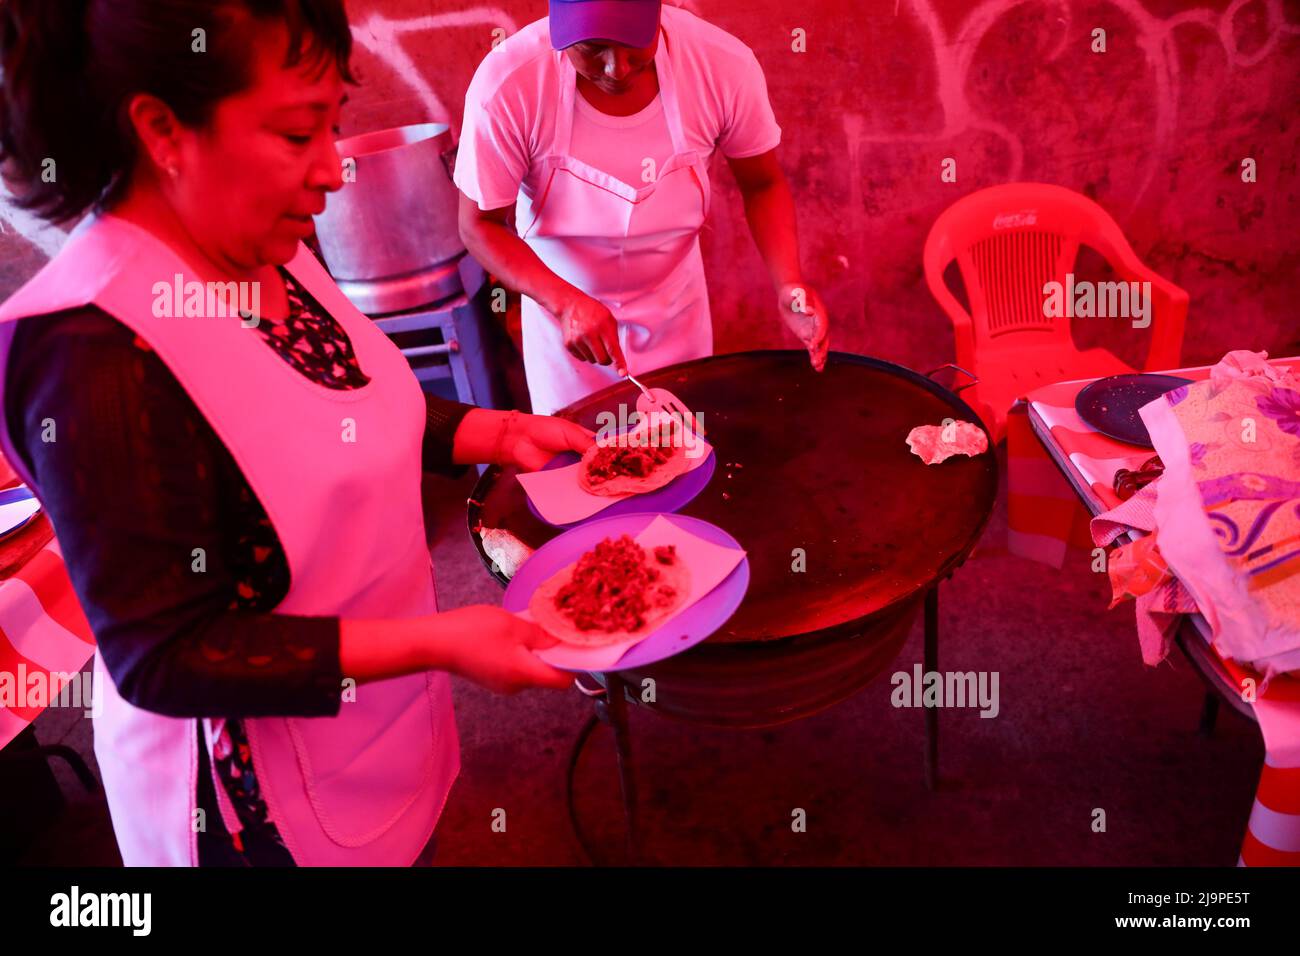 Vendors serve tacos inside of tortillas at a public market in Ozumba de Alzate, State of Mexico, Mexico, May 24, 2022. REUTERS/Edgard Garrido Stock Photo